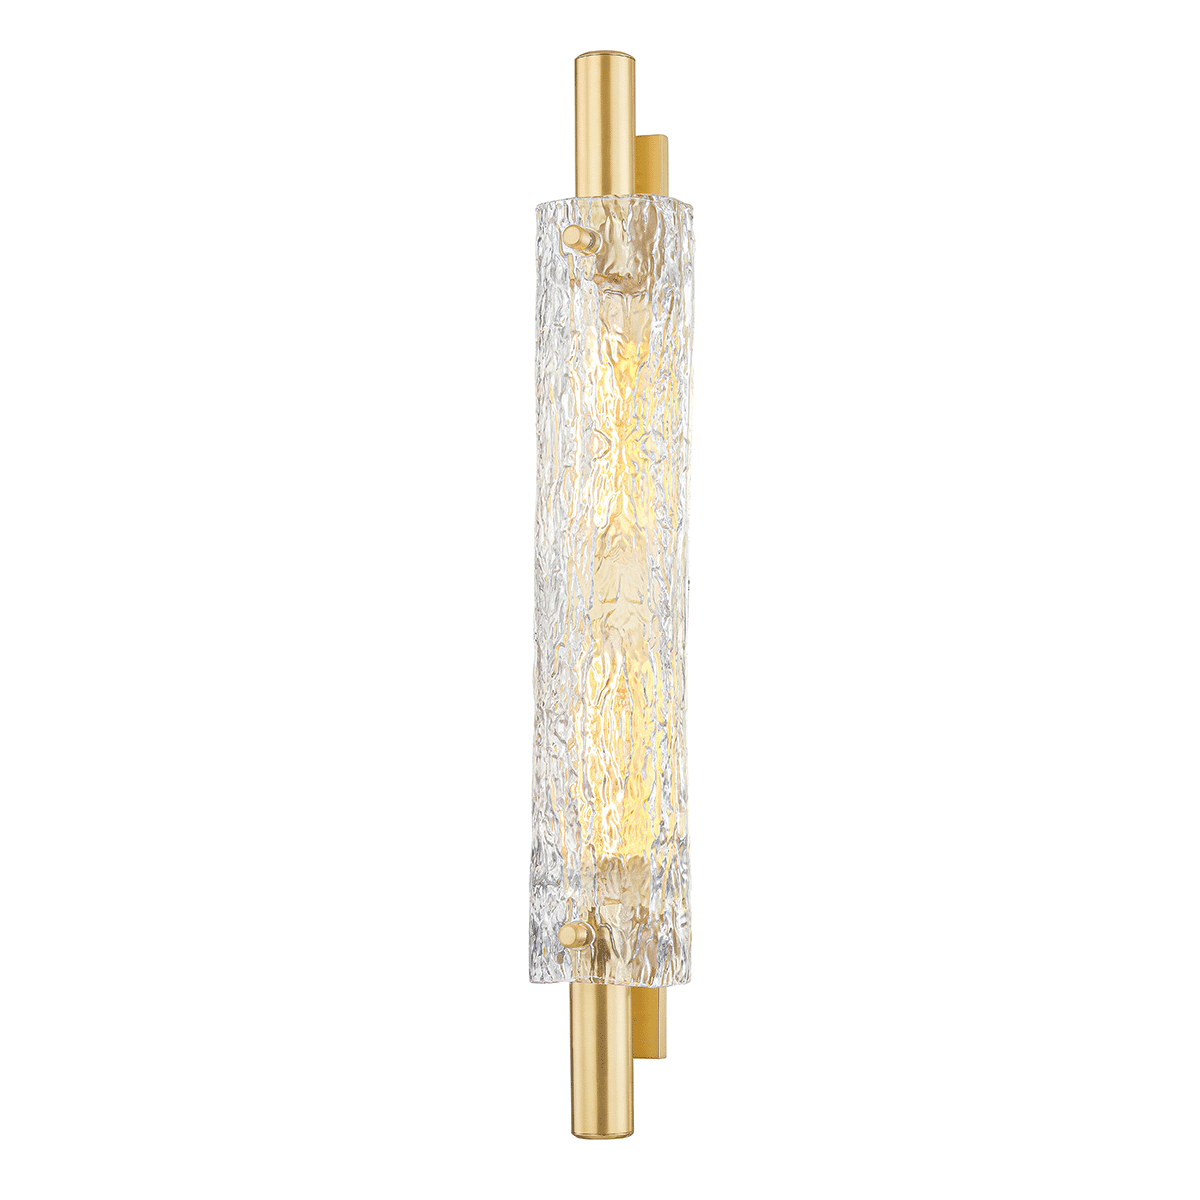 Hudson Valley Lighting - Harwich Wall Sconce - 8929-AGB | Montreal Lighting & Hardware